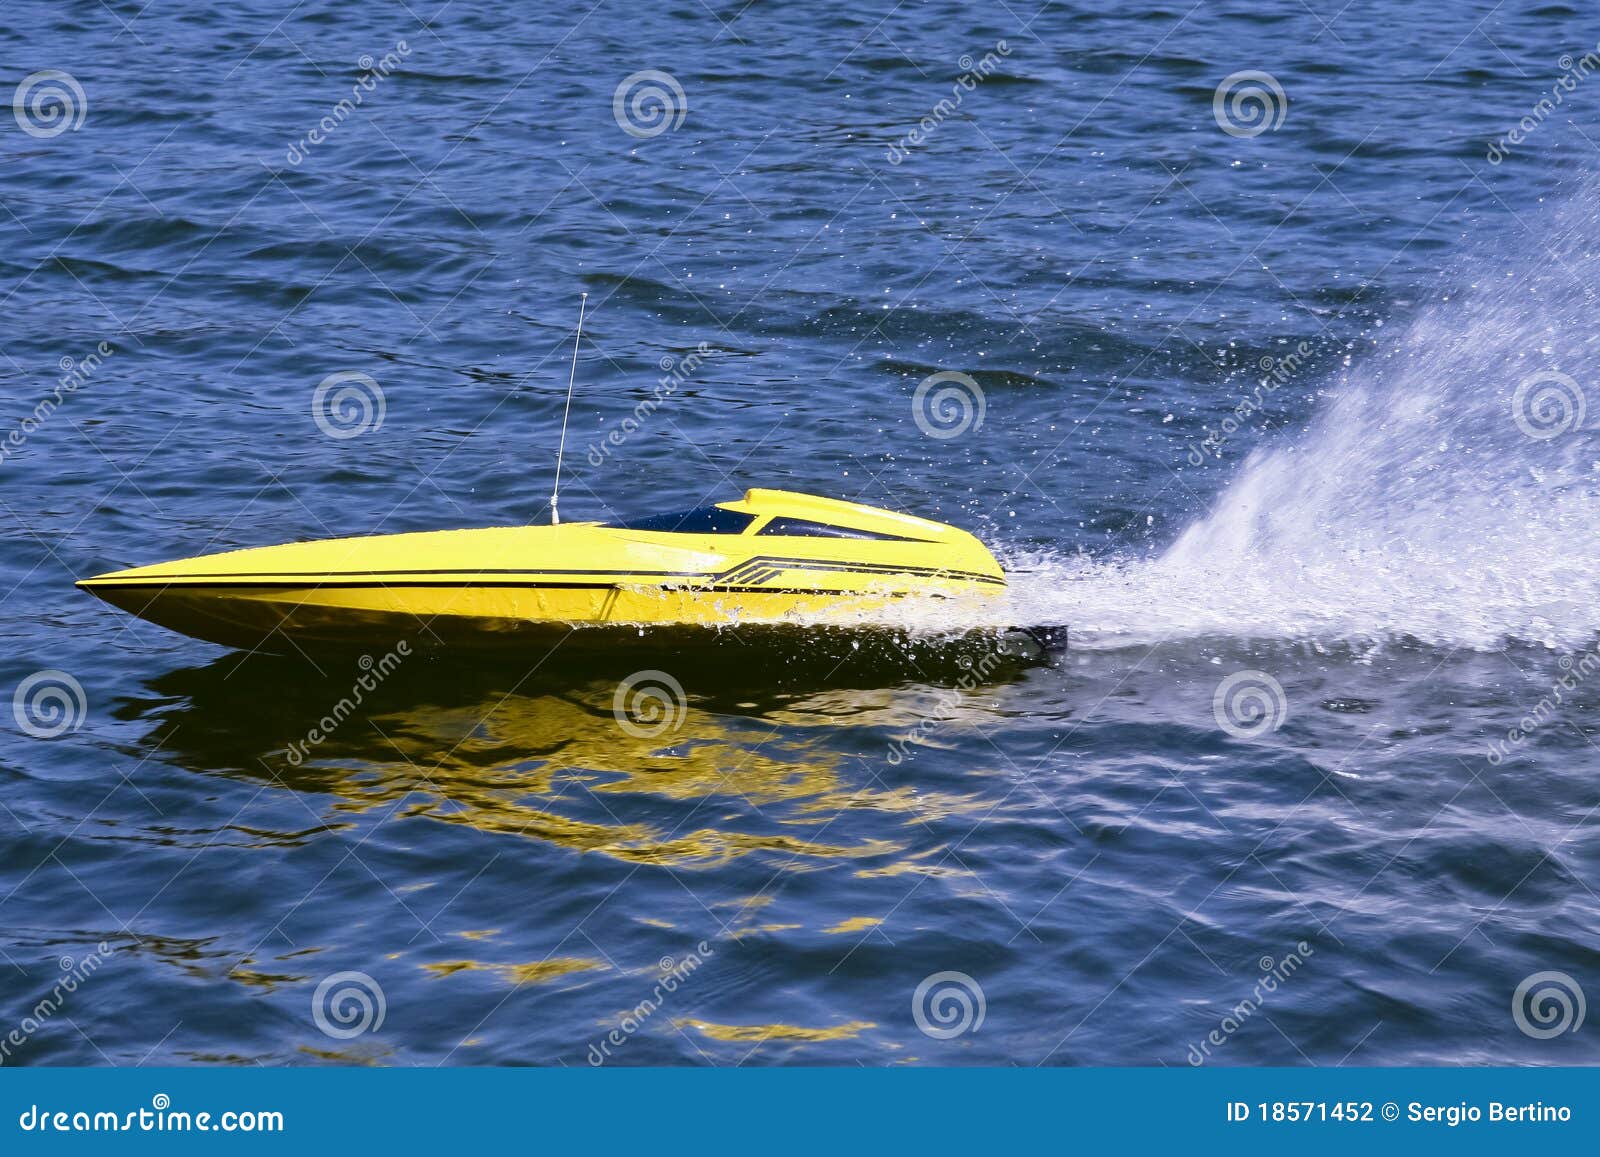 Fast electric model boat stock photo. Image of racing ...